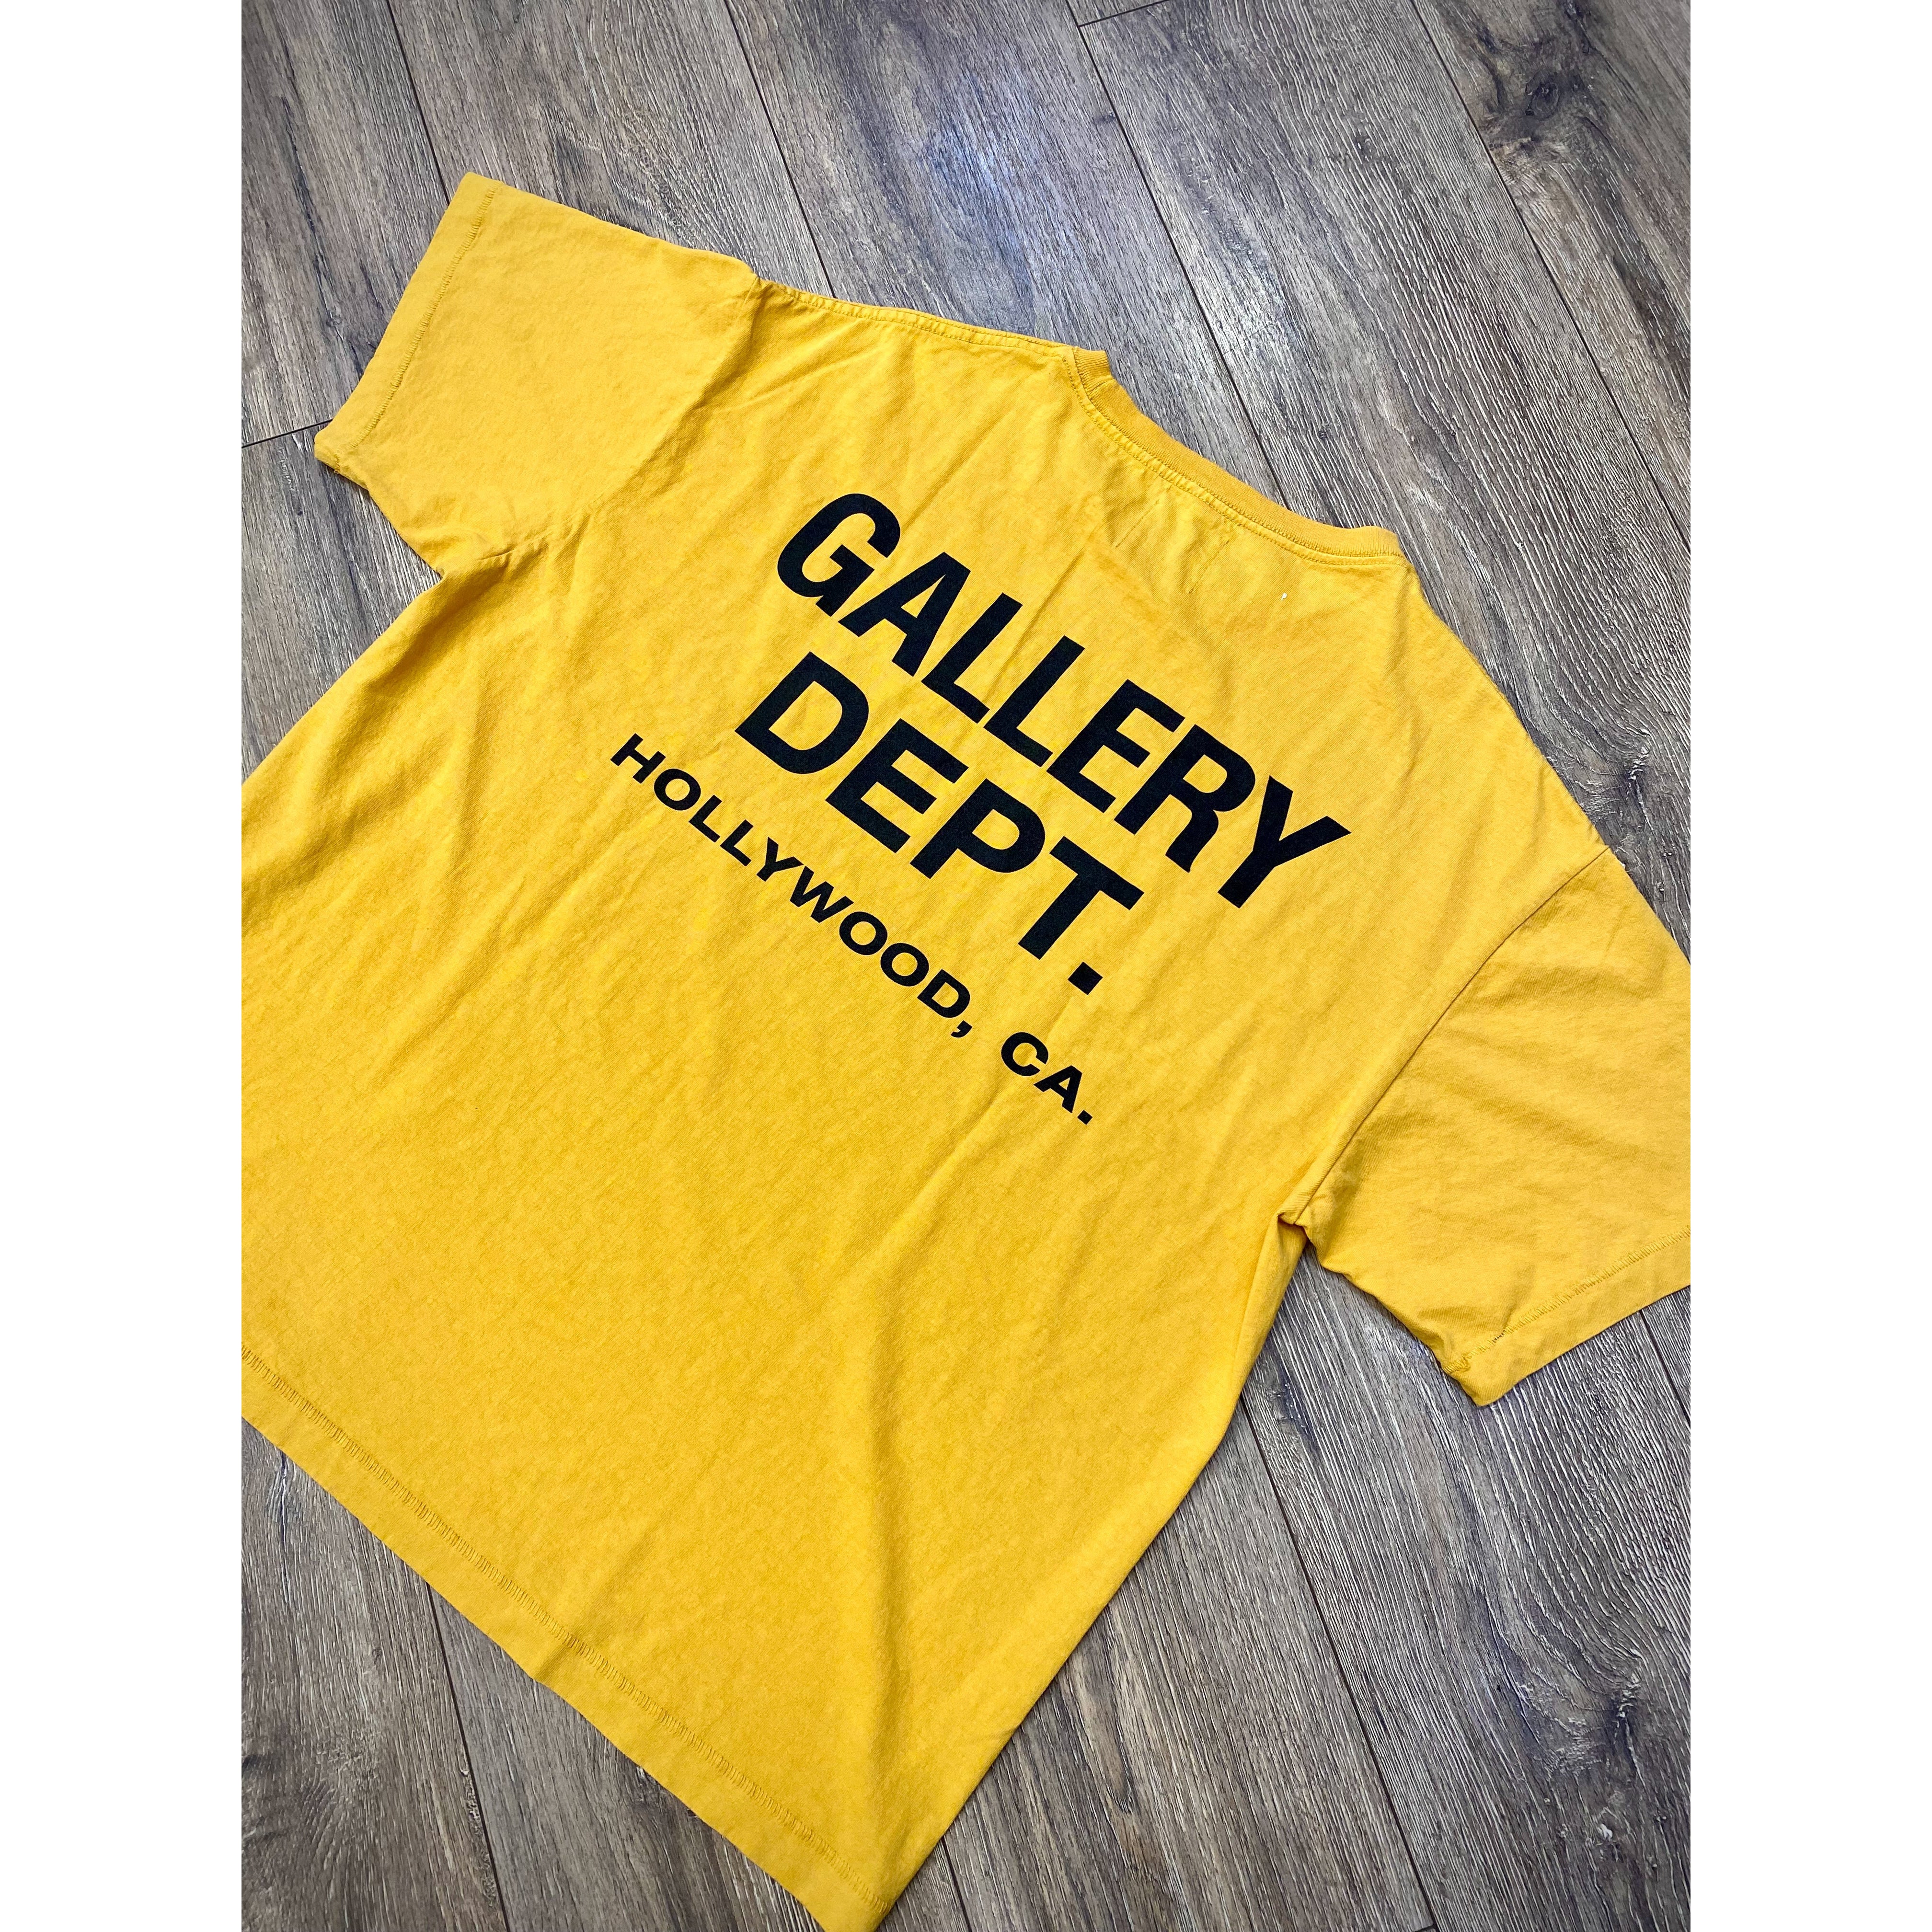 Gallery Dept. Palm Springs T-Shirt Yellow